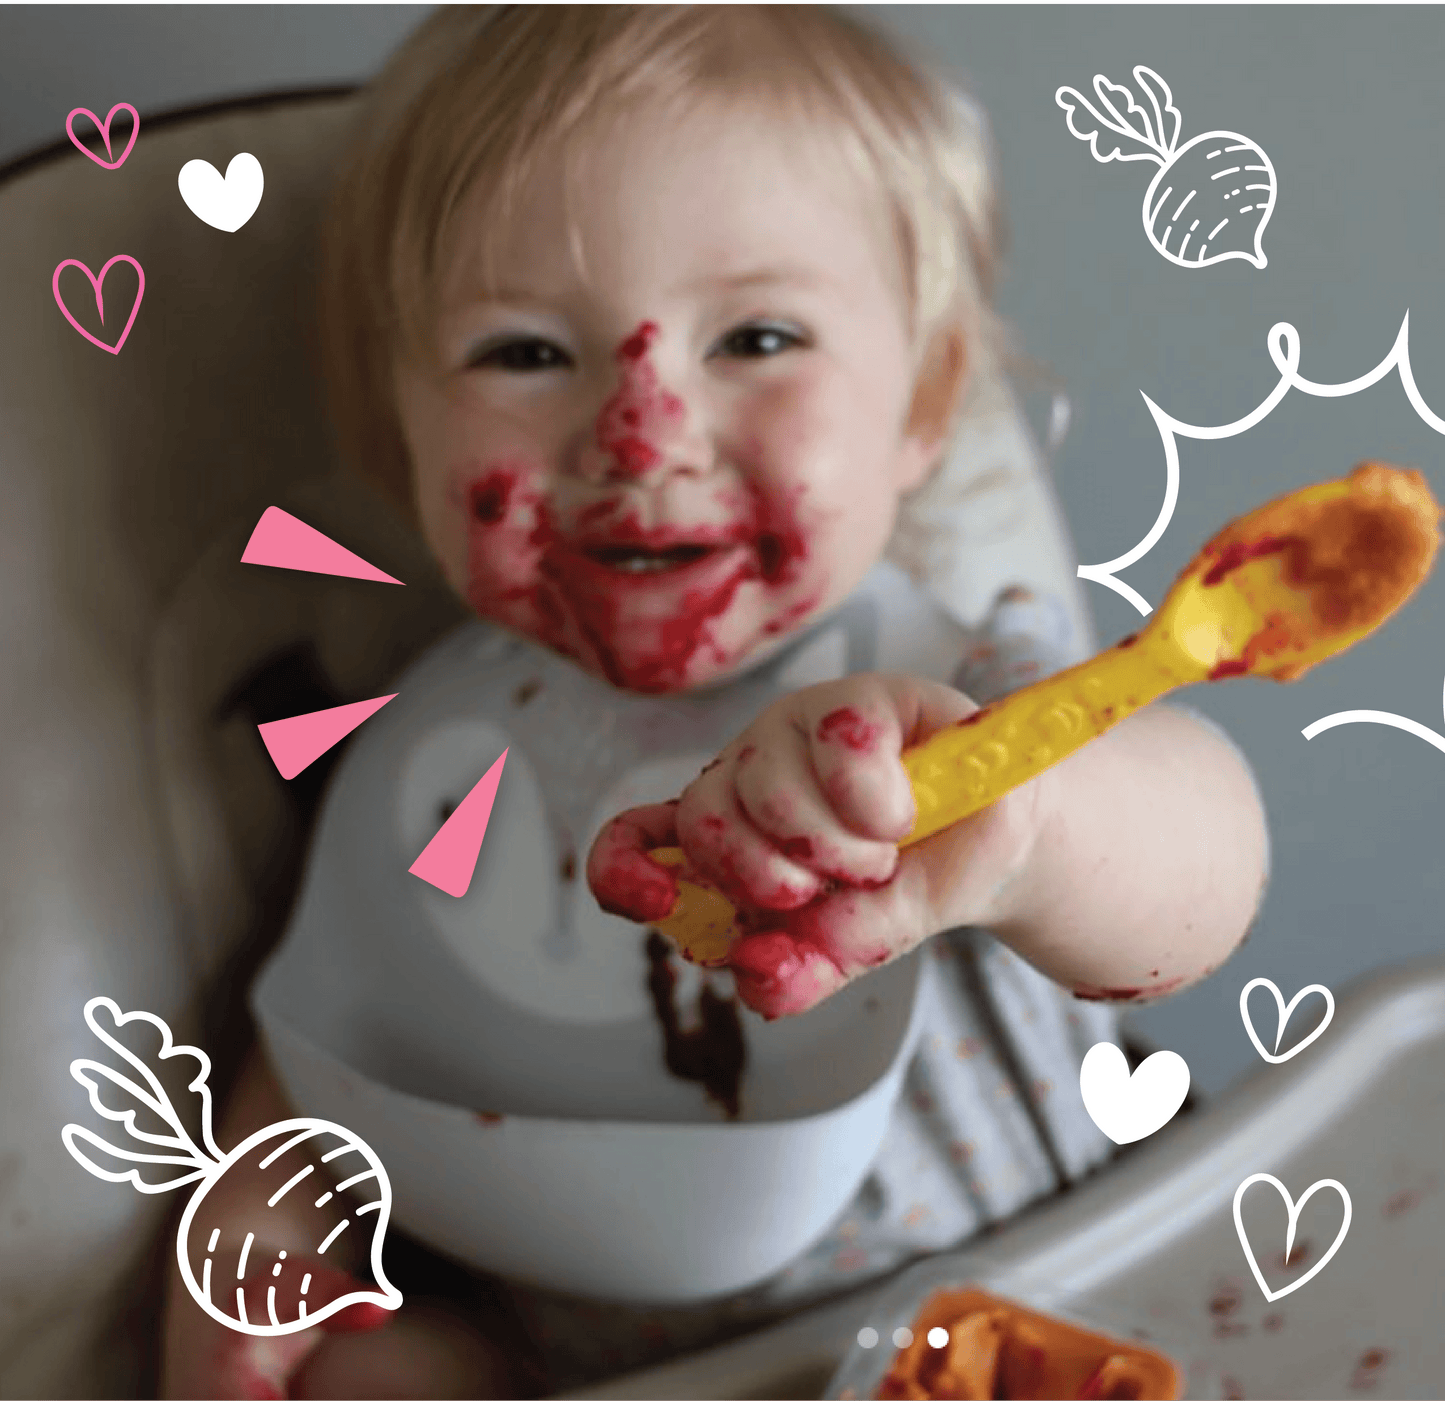 Make Nutrient-Dense Foods a Part of Your Baby's First 1000 Days - lil'gourmets